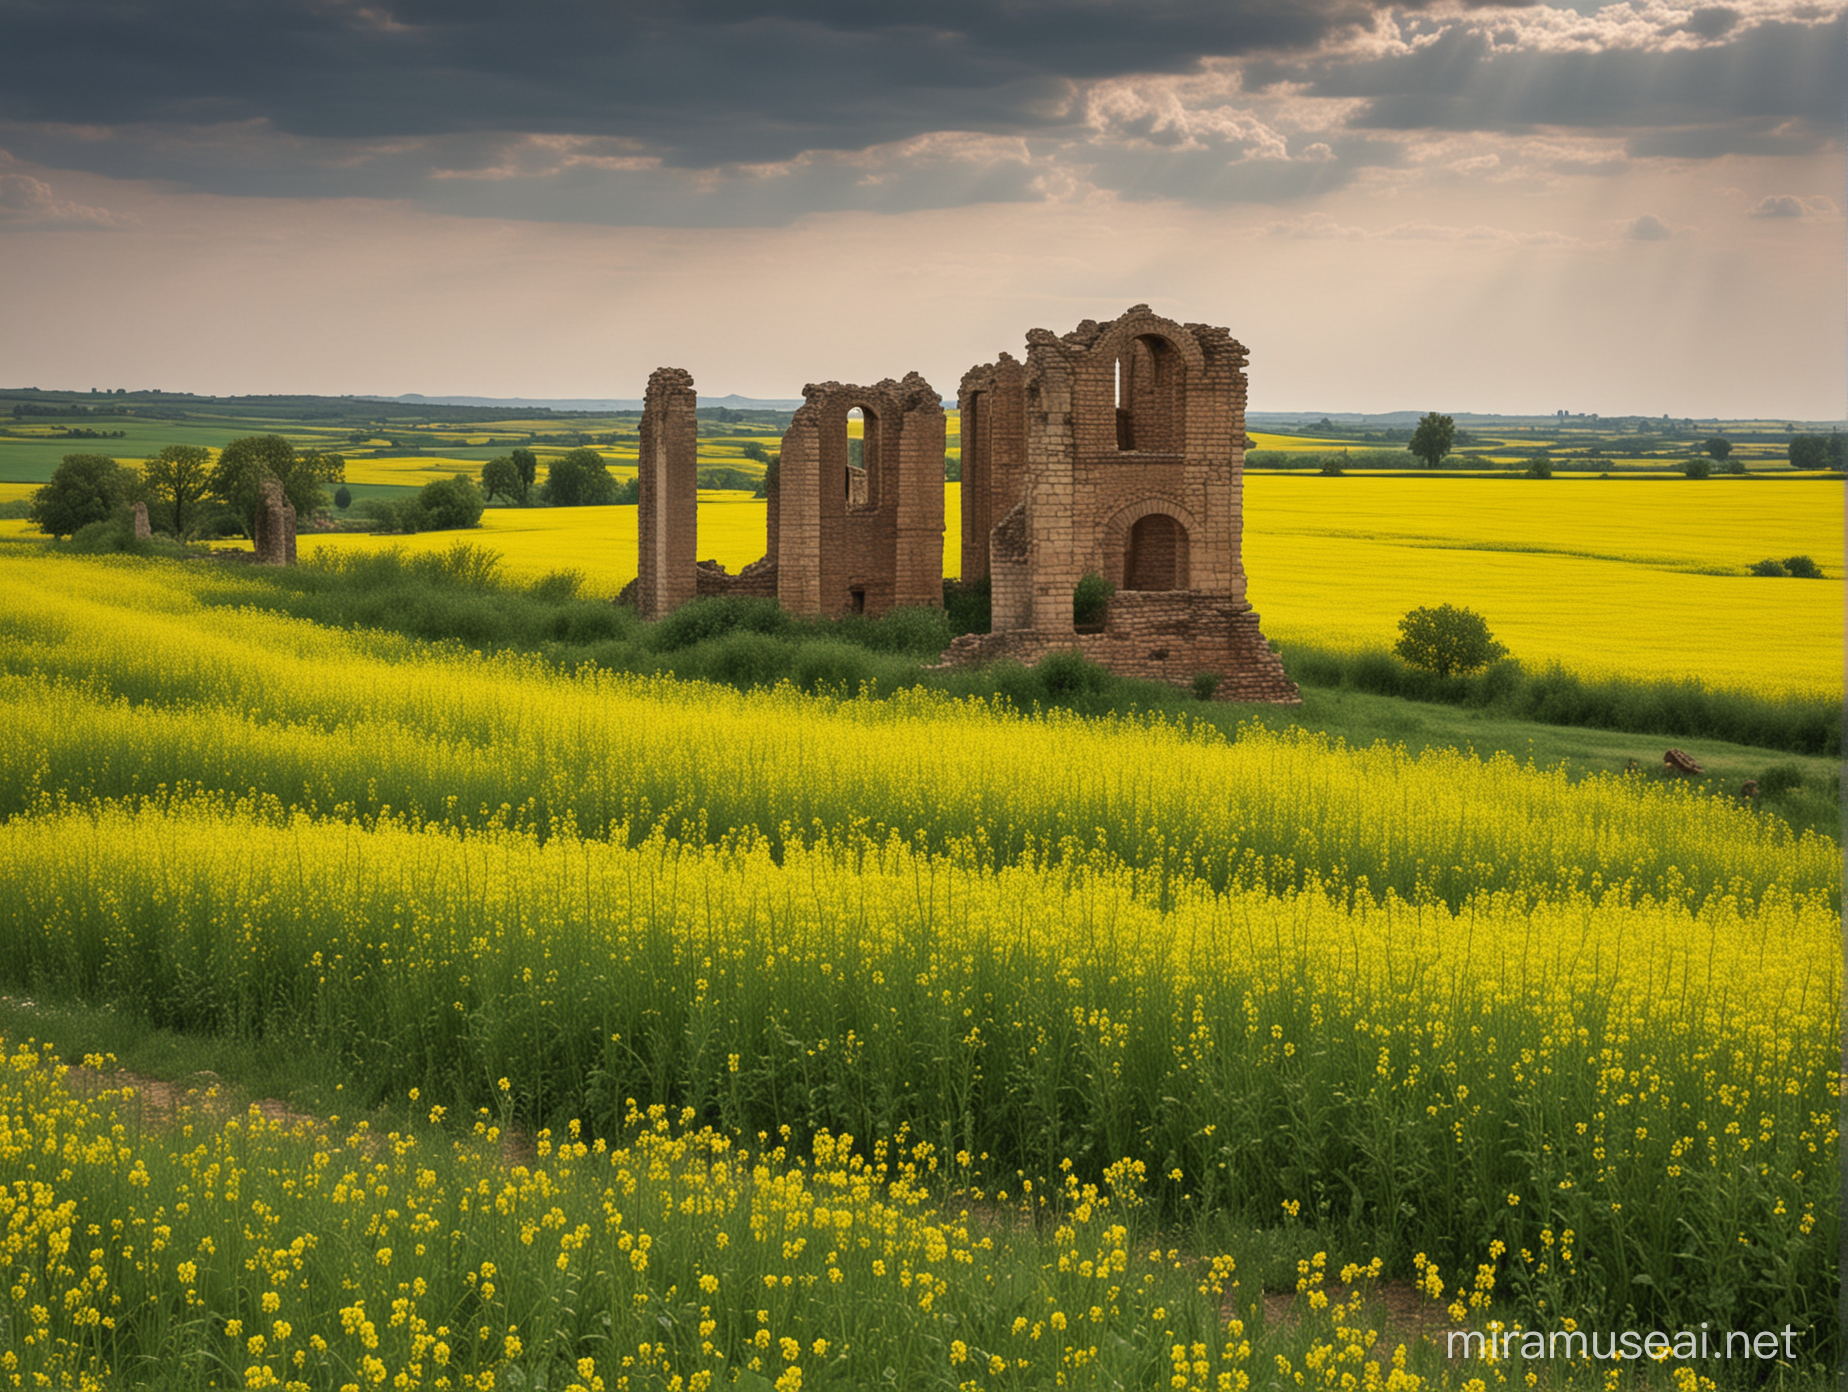 Sunlit Rapeseed Field Surrounding Ancient Ruins